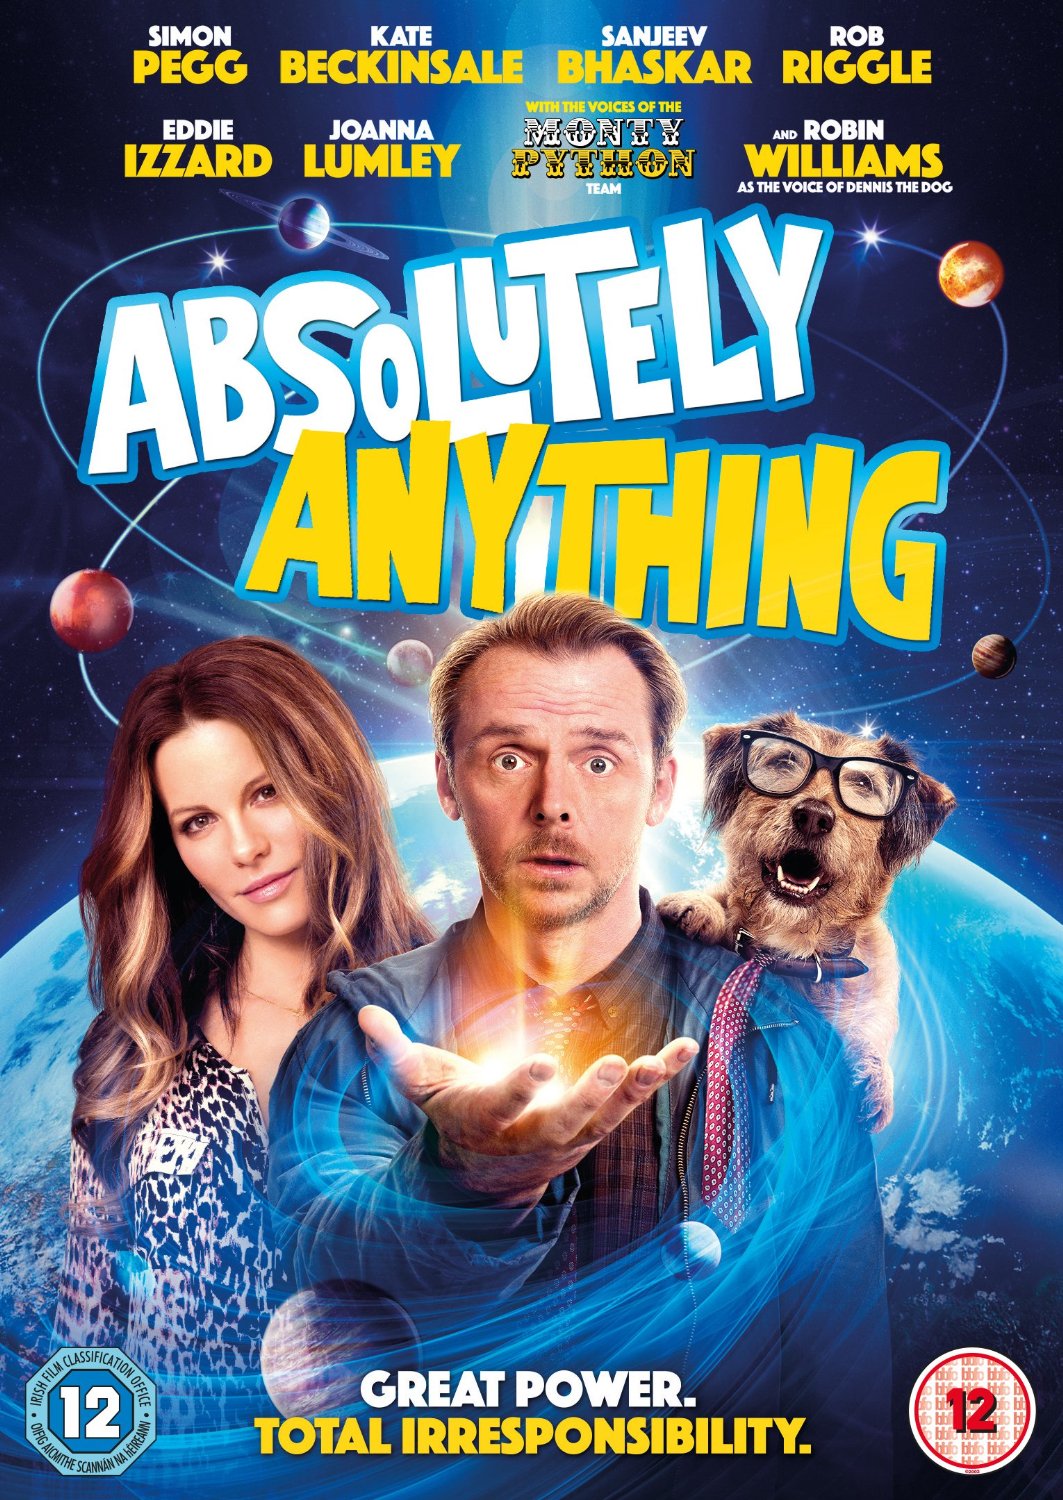 Absolutely Anything #3